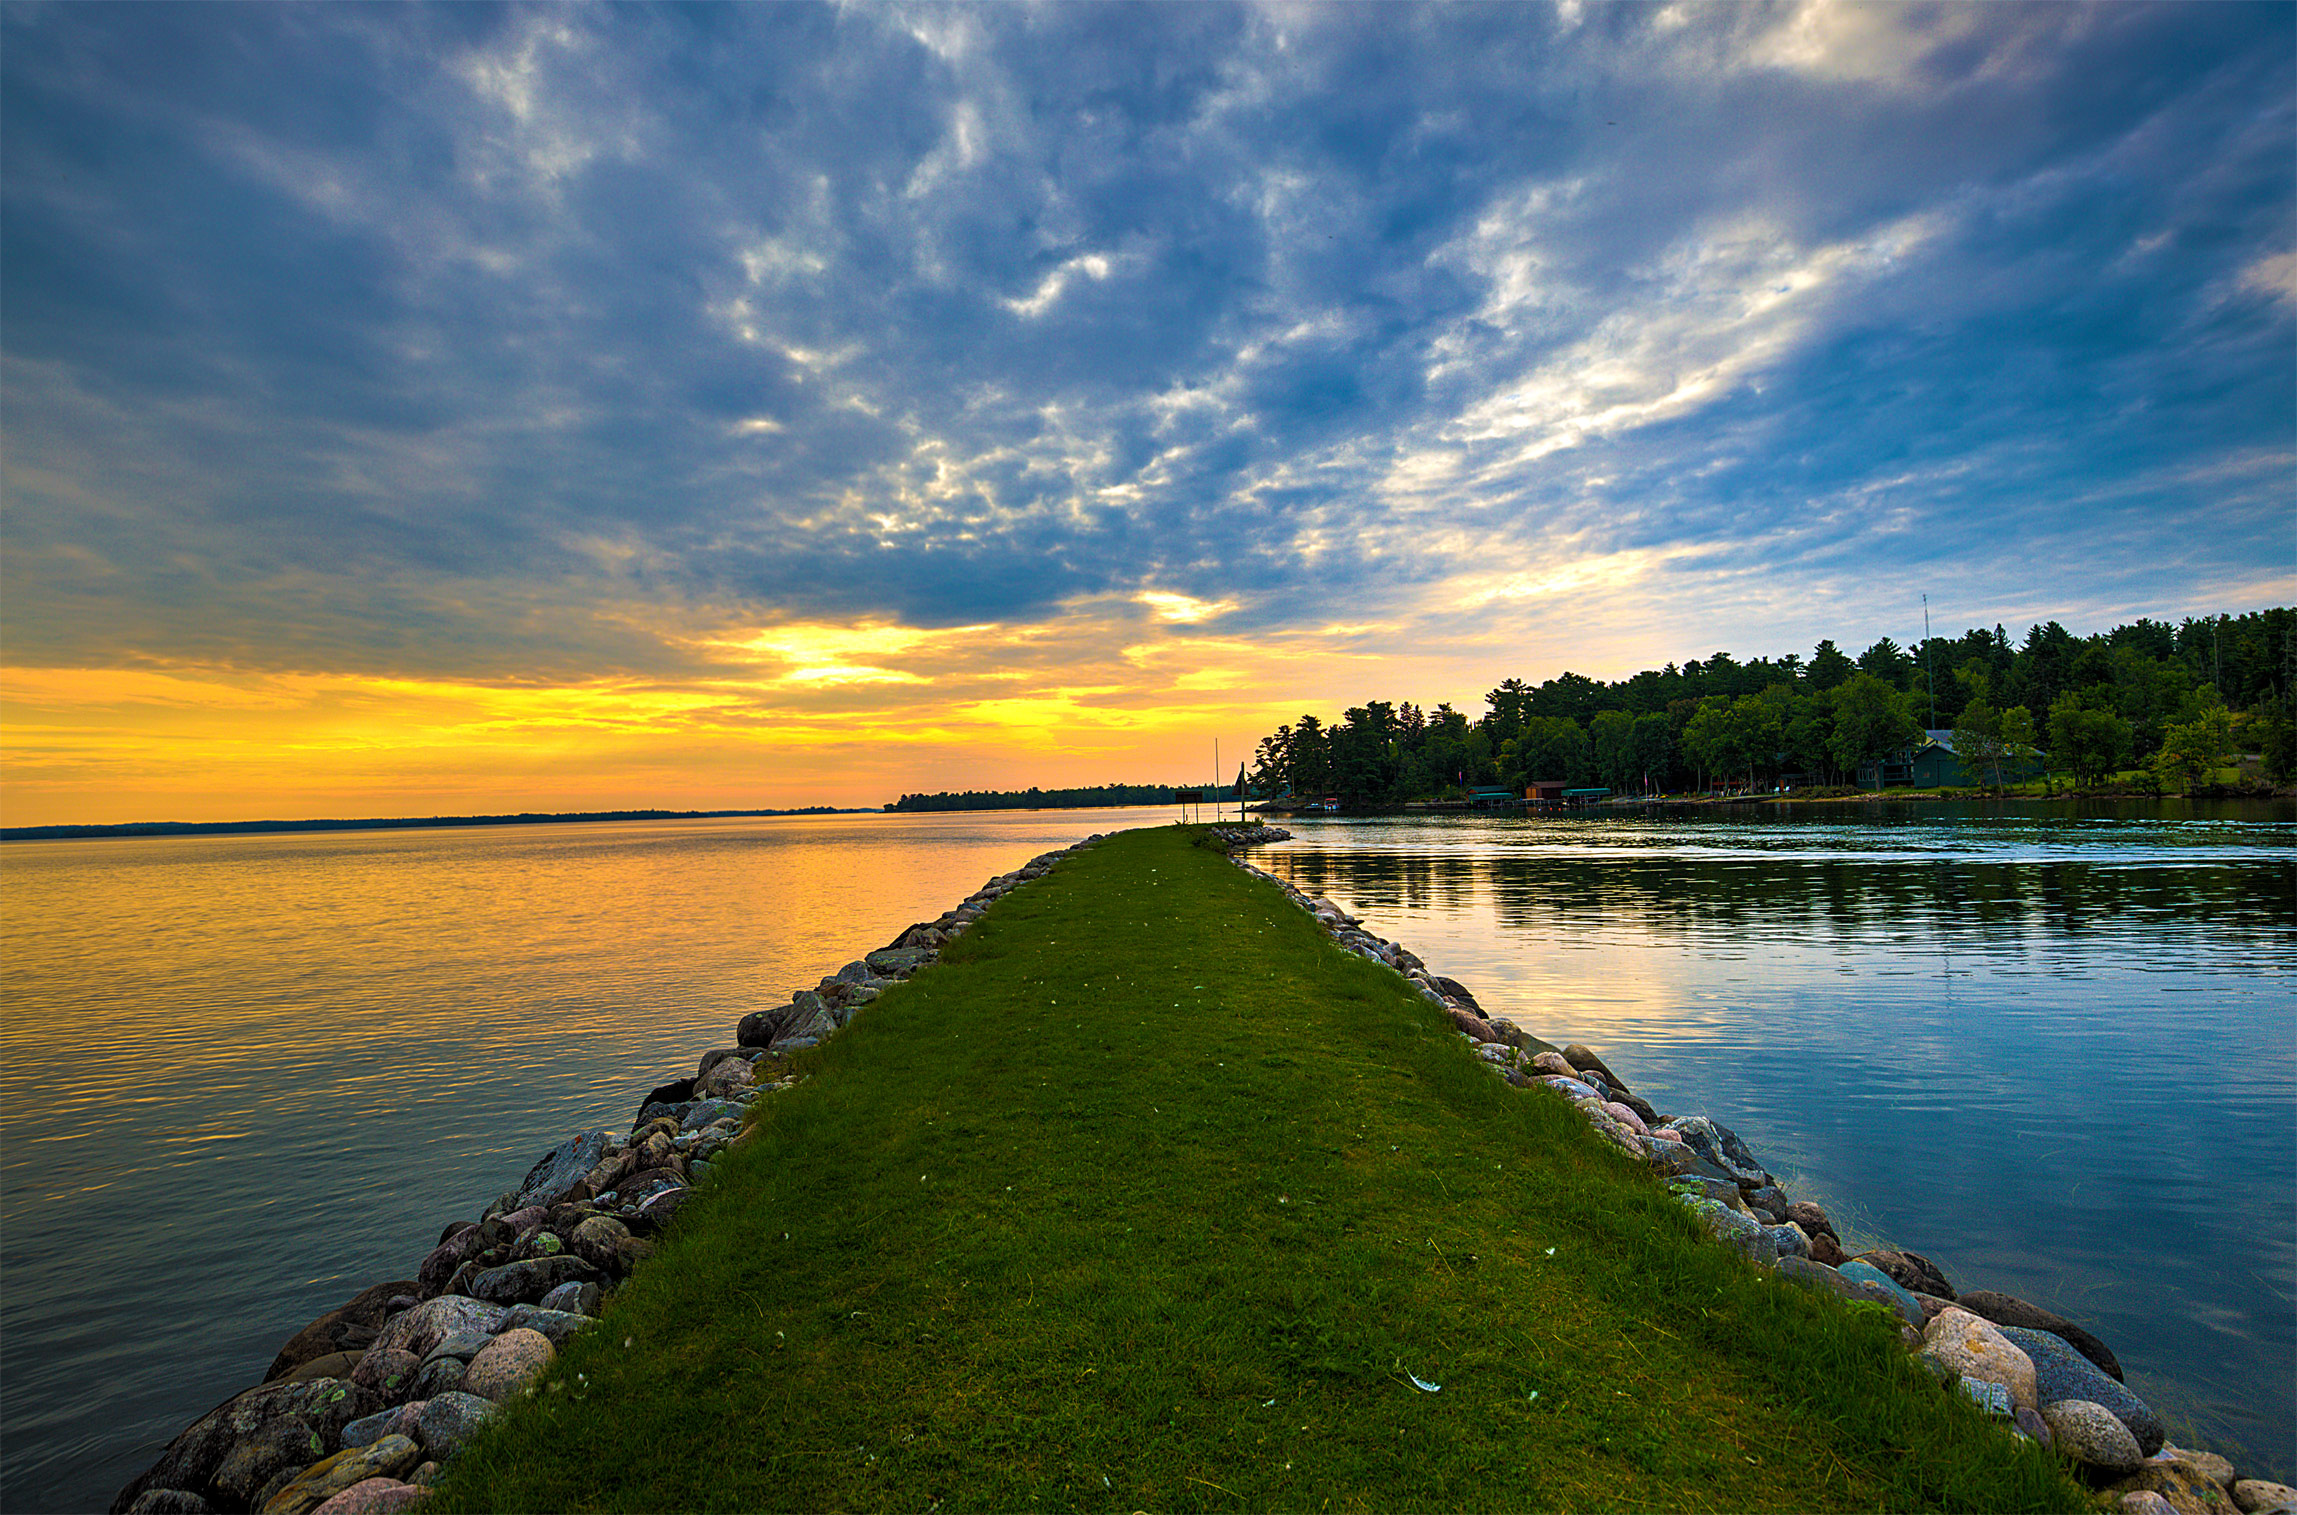 Looking out at Kabetogama Lake at Sunrise in Voyageurs National Park